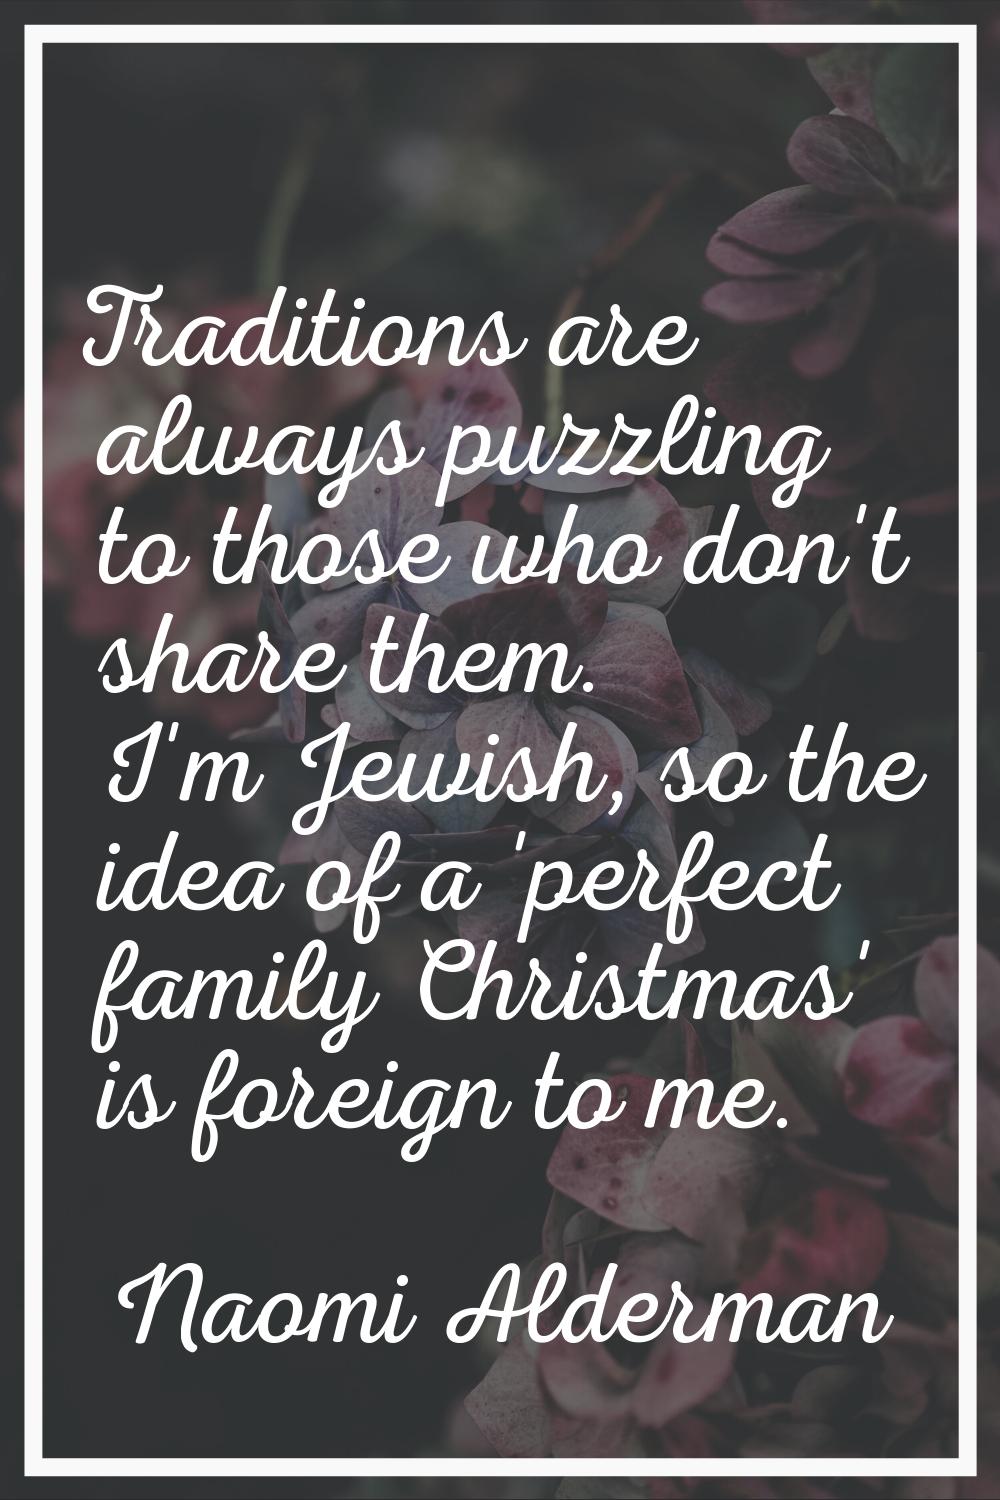 Traditions are always puzzling to those who don't share them. I'm Jewish, so the idea of a 'perfect